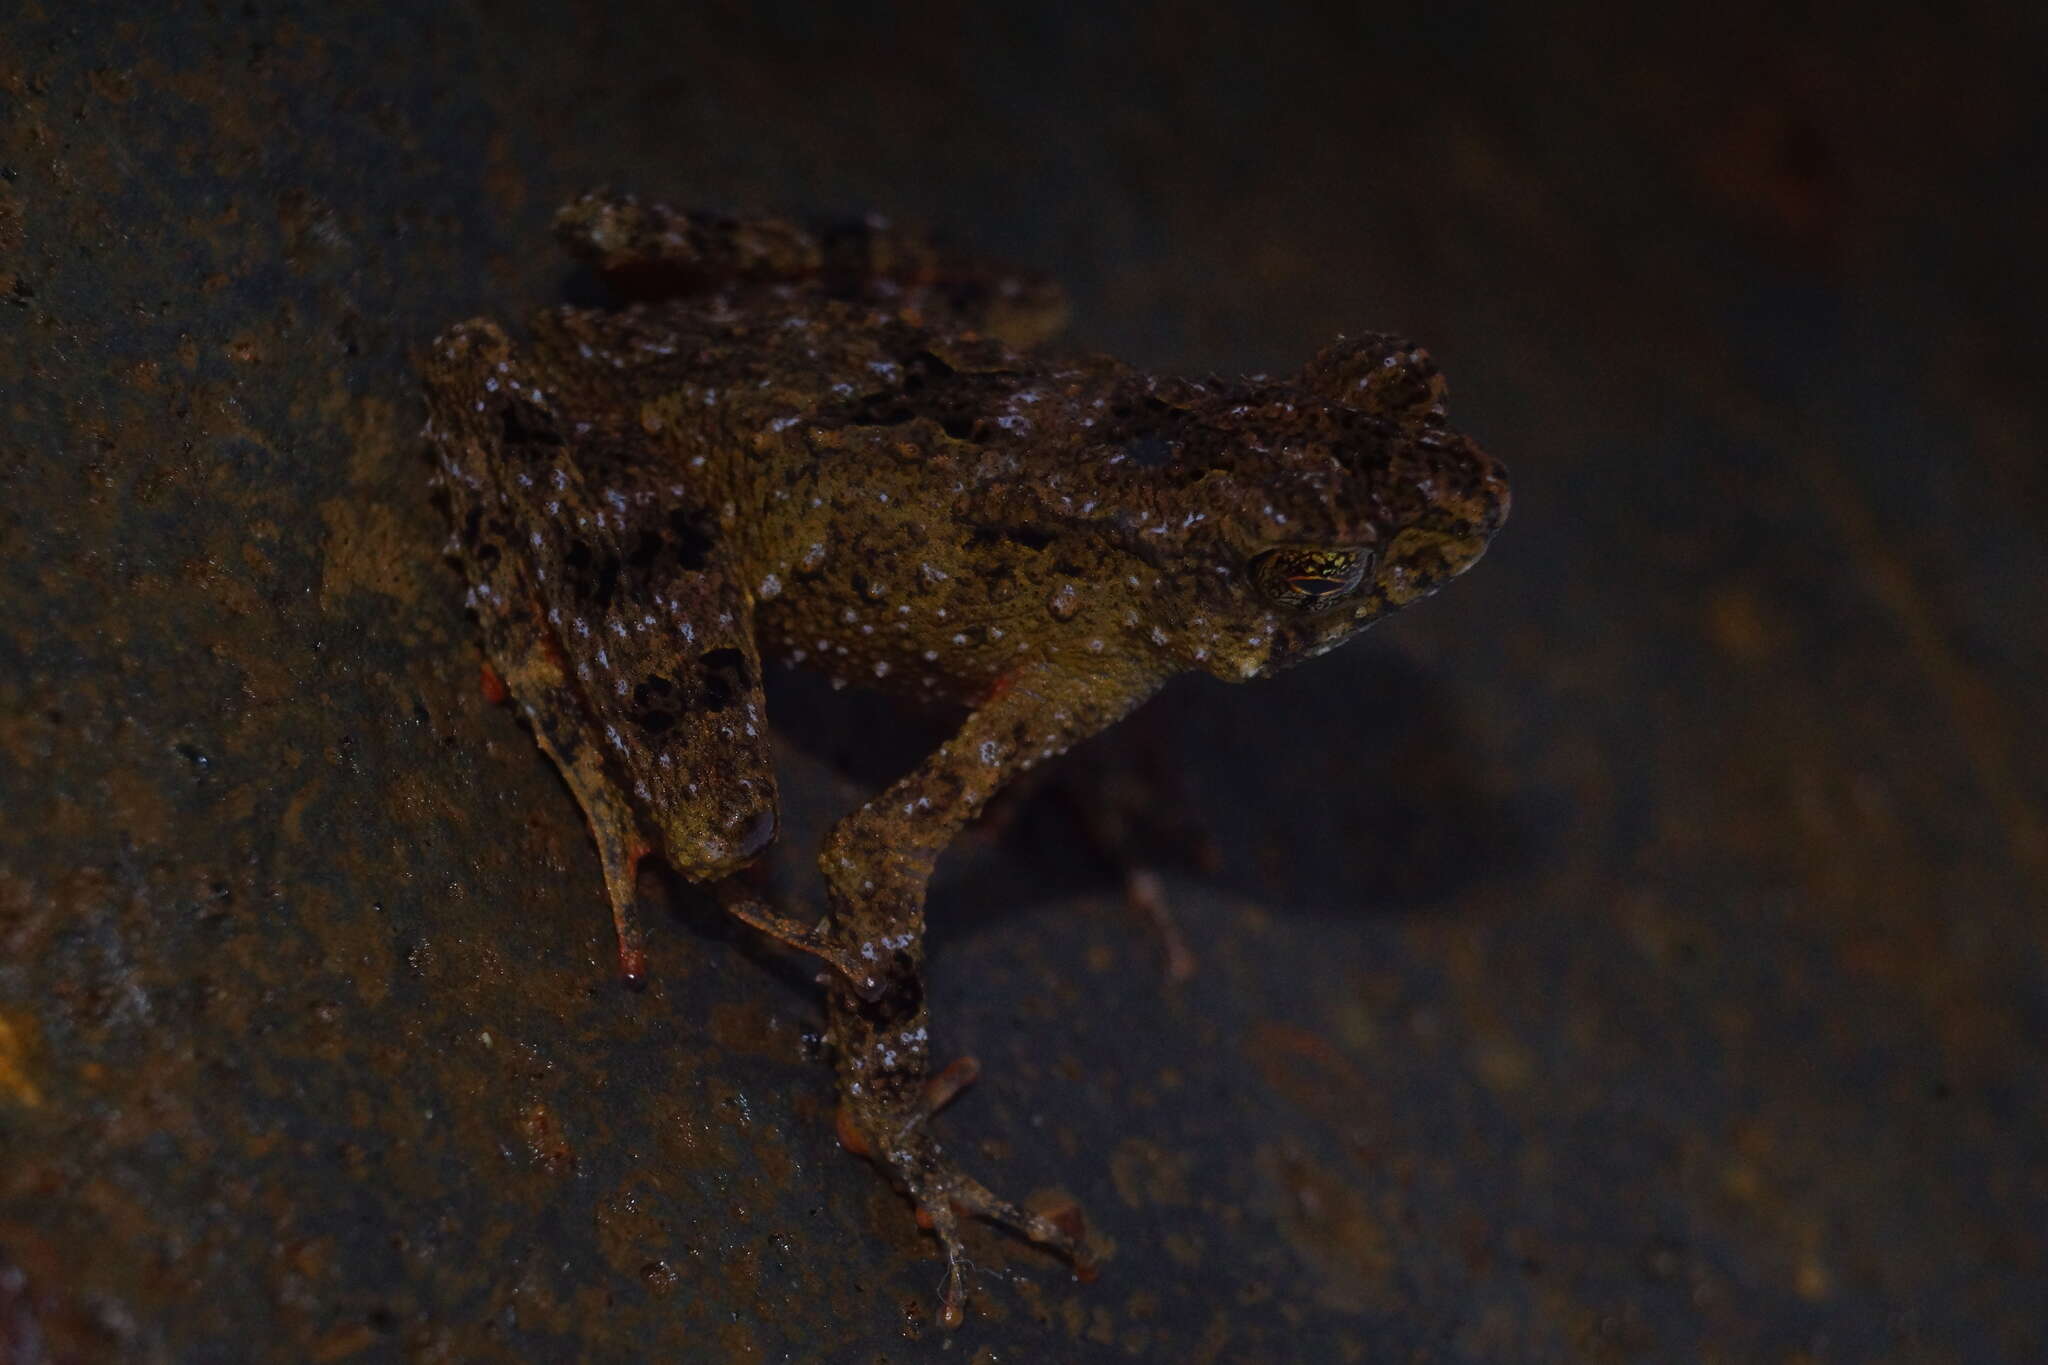 Image of Bourbon Toad